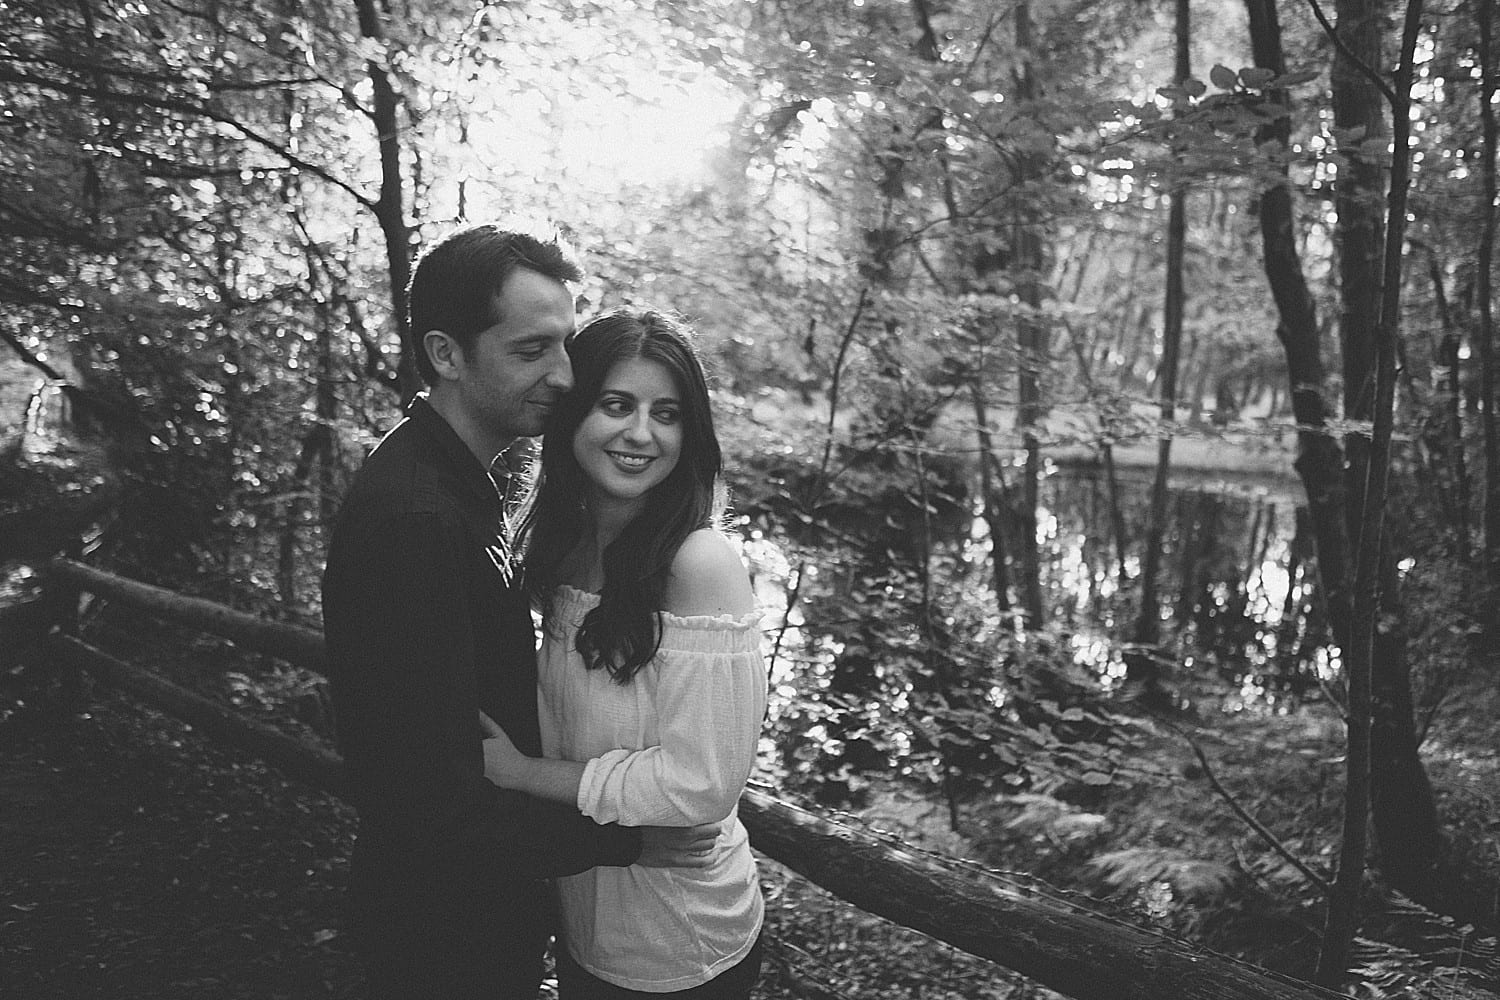 Cheshire engagement photography in black and white